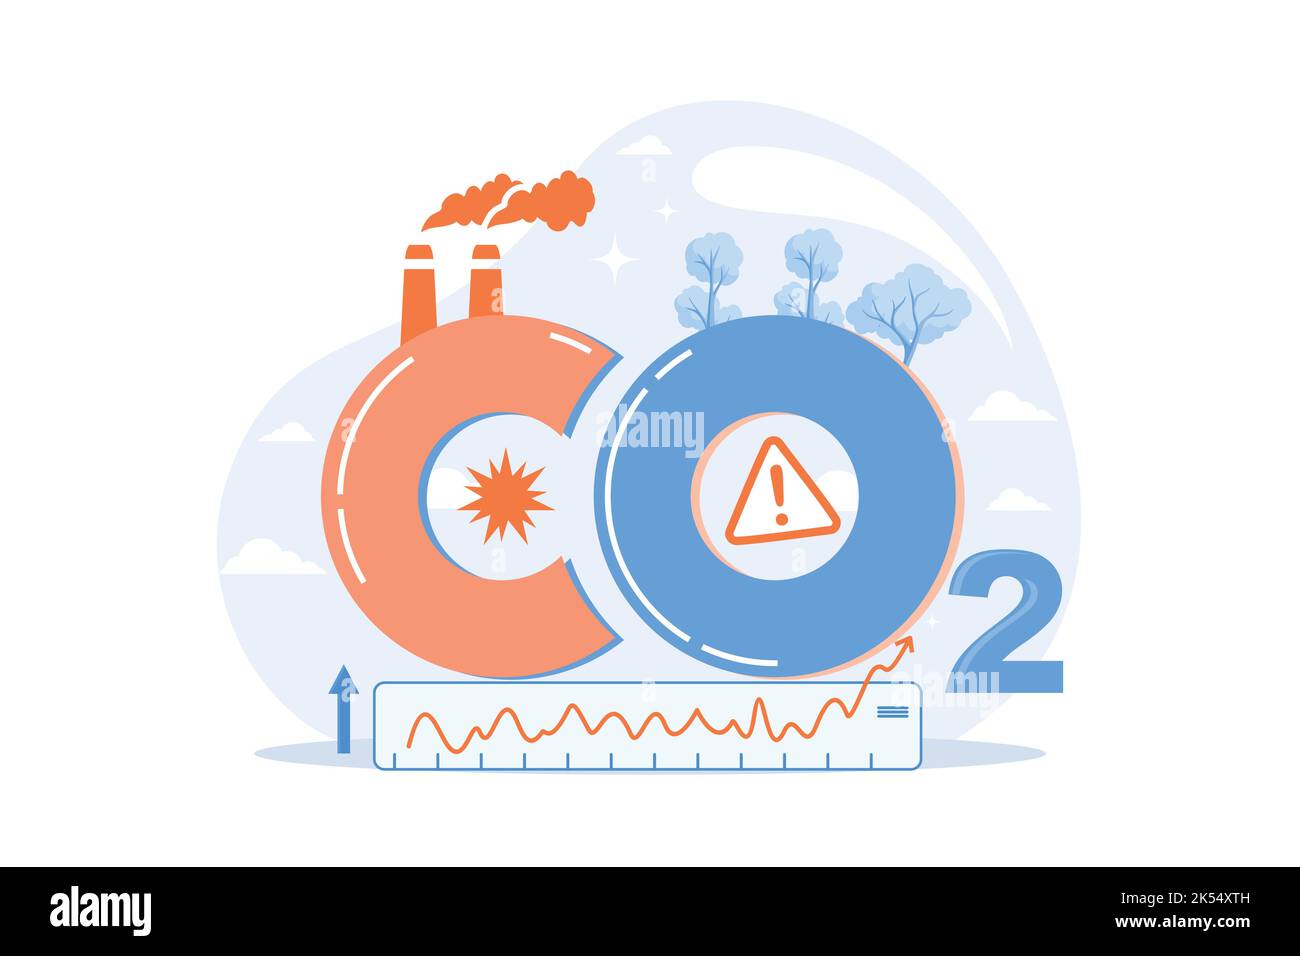 high levels carbon dioxide CO2 atmosphere. Industrial emissions affect changes in carbon dioxide concentration. Causes of climate change on planet. Pr Stock Vector